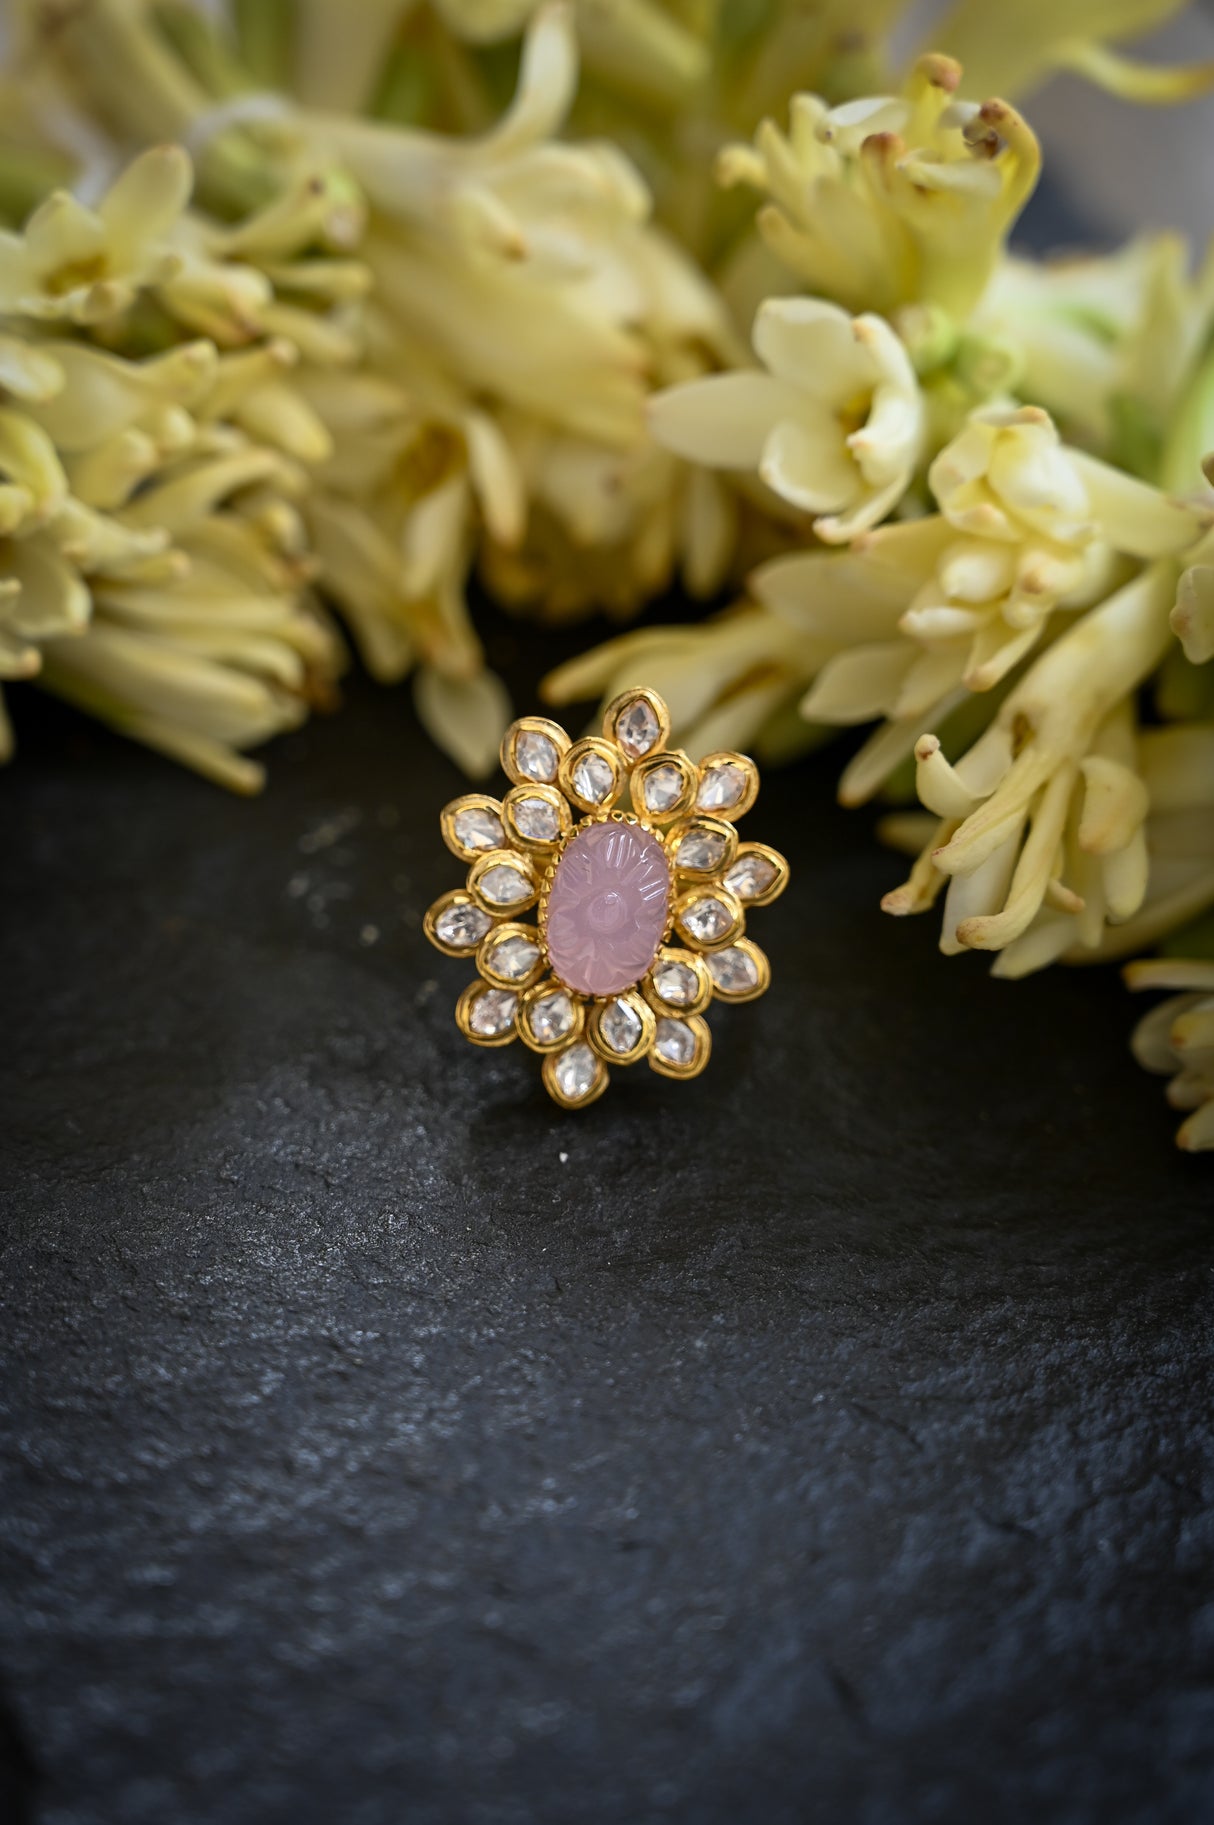 Handcrafted Adjustable 92.5 Silver Ring with Moissanite polki and Carved Pink Strawberry Bead